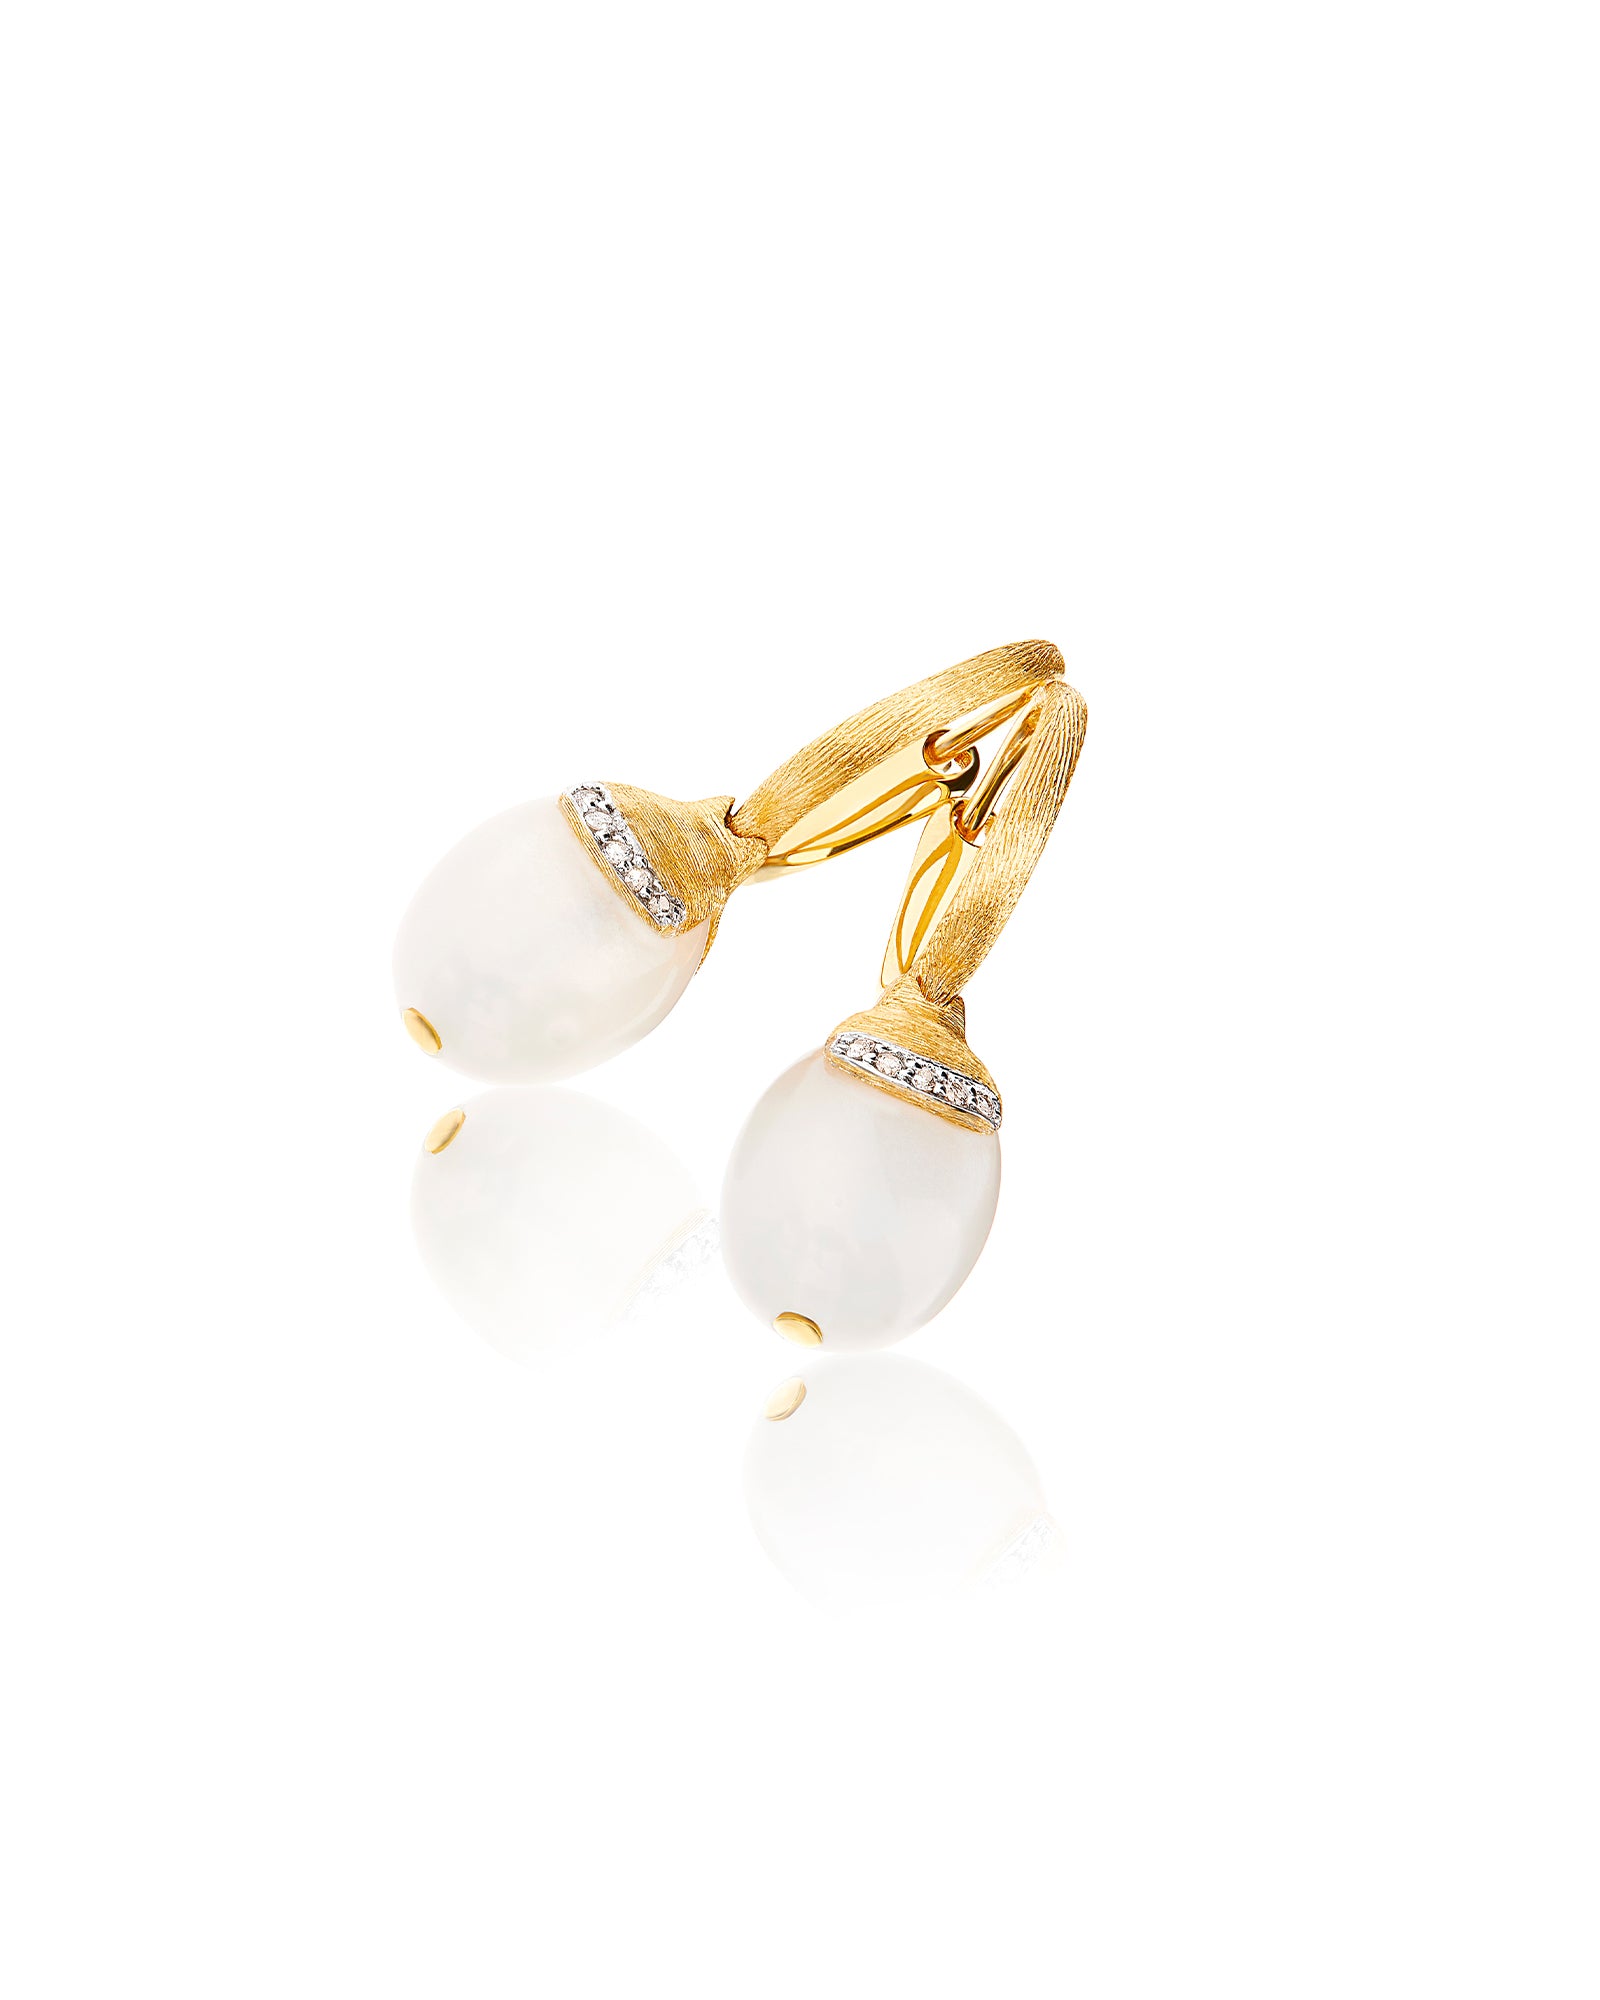 WHITE DESERT "AMULETS" CILIEGINE GOLD AND WHITE MOONSTONE BALL DROP EARRINGS WITH DIAMONDS DETAILS (SMALL) OS7-603